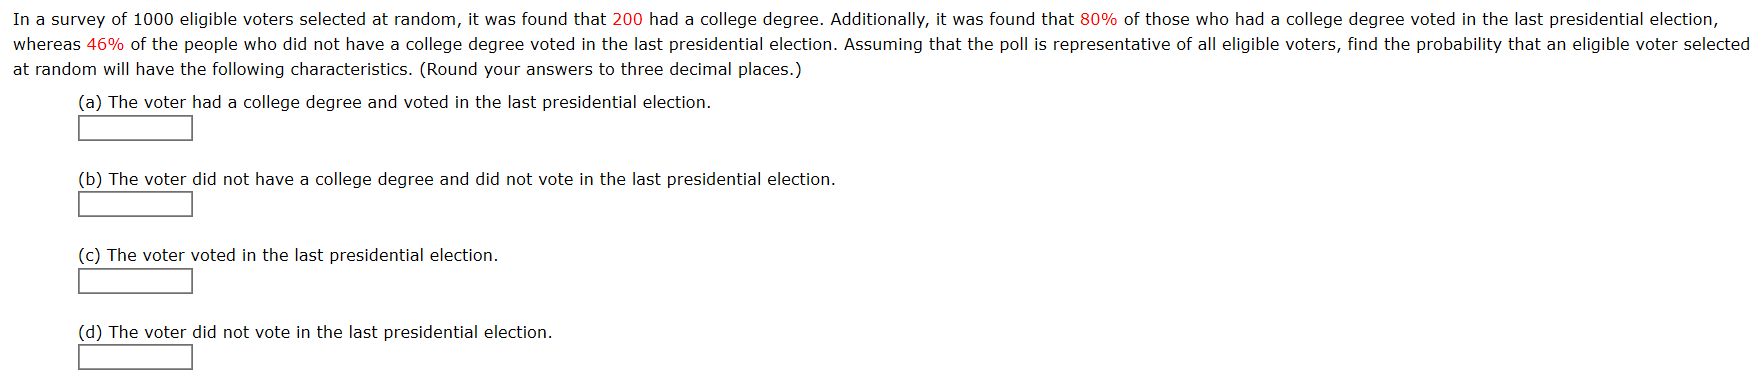 In a survey of 1000 eligible voters selected at random, it was found that 200 had a college degree. Additionally, it was found that 80% of those who had a college degree voted in the last presidential election,
whereas 46% of the people who did not have a college degree voted in the last presidential election. Assuming that the poll is representative of all eligible voters, find the probability that an eligible voter selected
at random will have the following characteristics. (Round your answers to three decimal places.)
(a) The voter had a college degree and voted in the last presidential election.
(b) The voter did not have a college degree and did not vote in the last presidential election.
(c) The voter voted in the last presidential election.
(d) The voter did not vote in the last presidential election.
